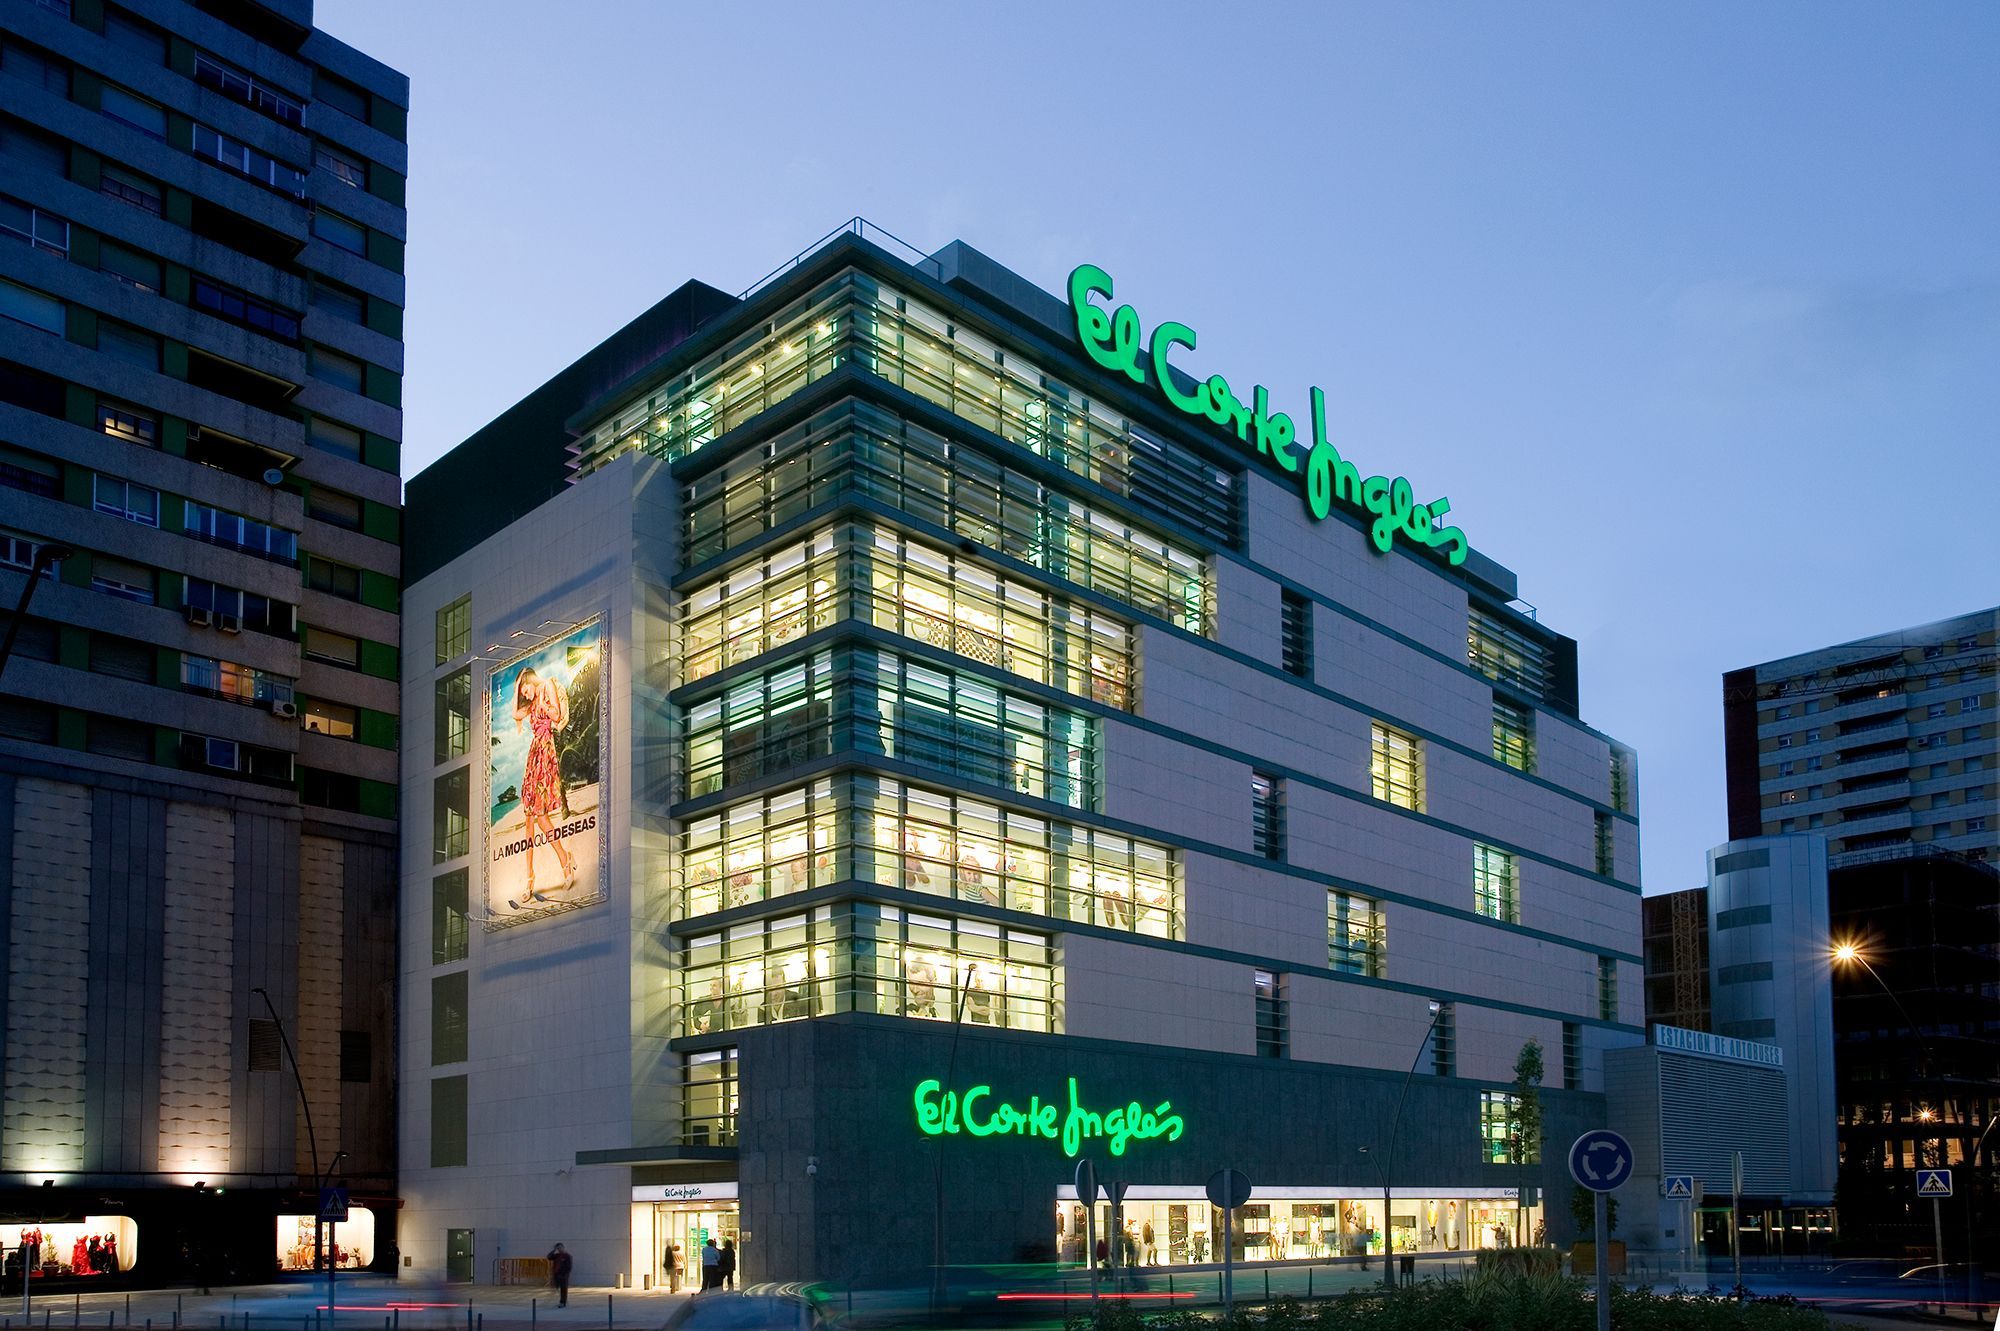 El Corte Inglés is reinforced in outsourcing after its alliances